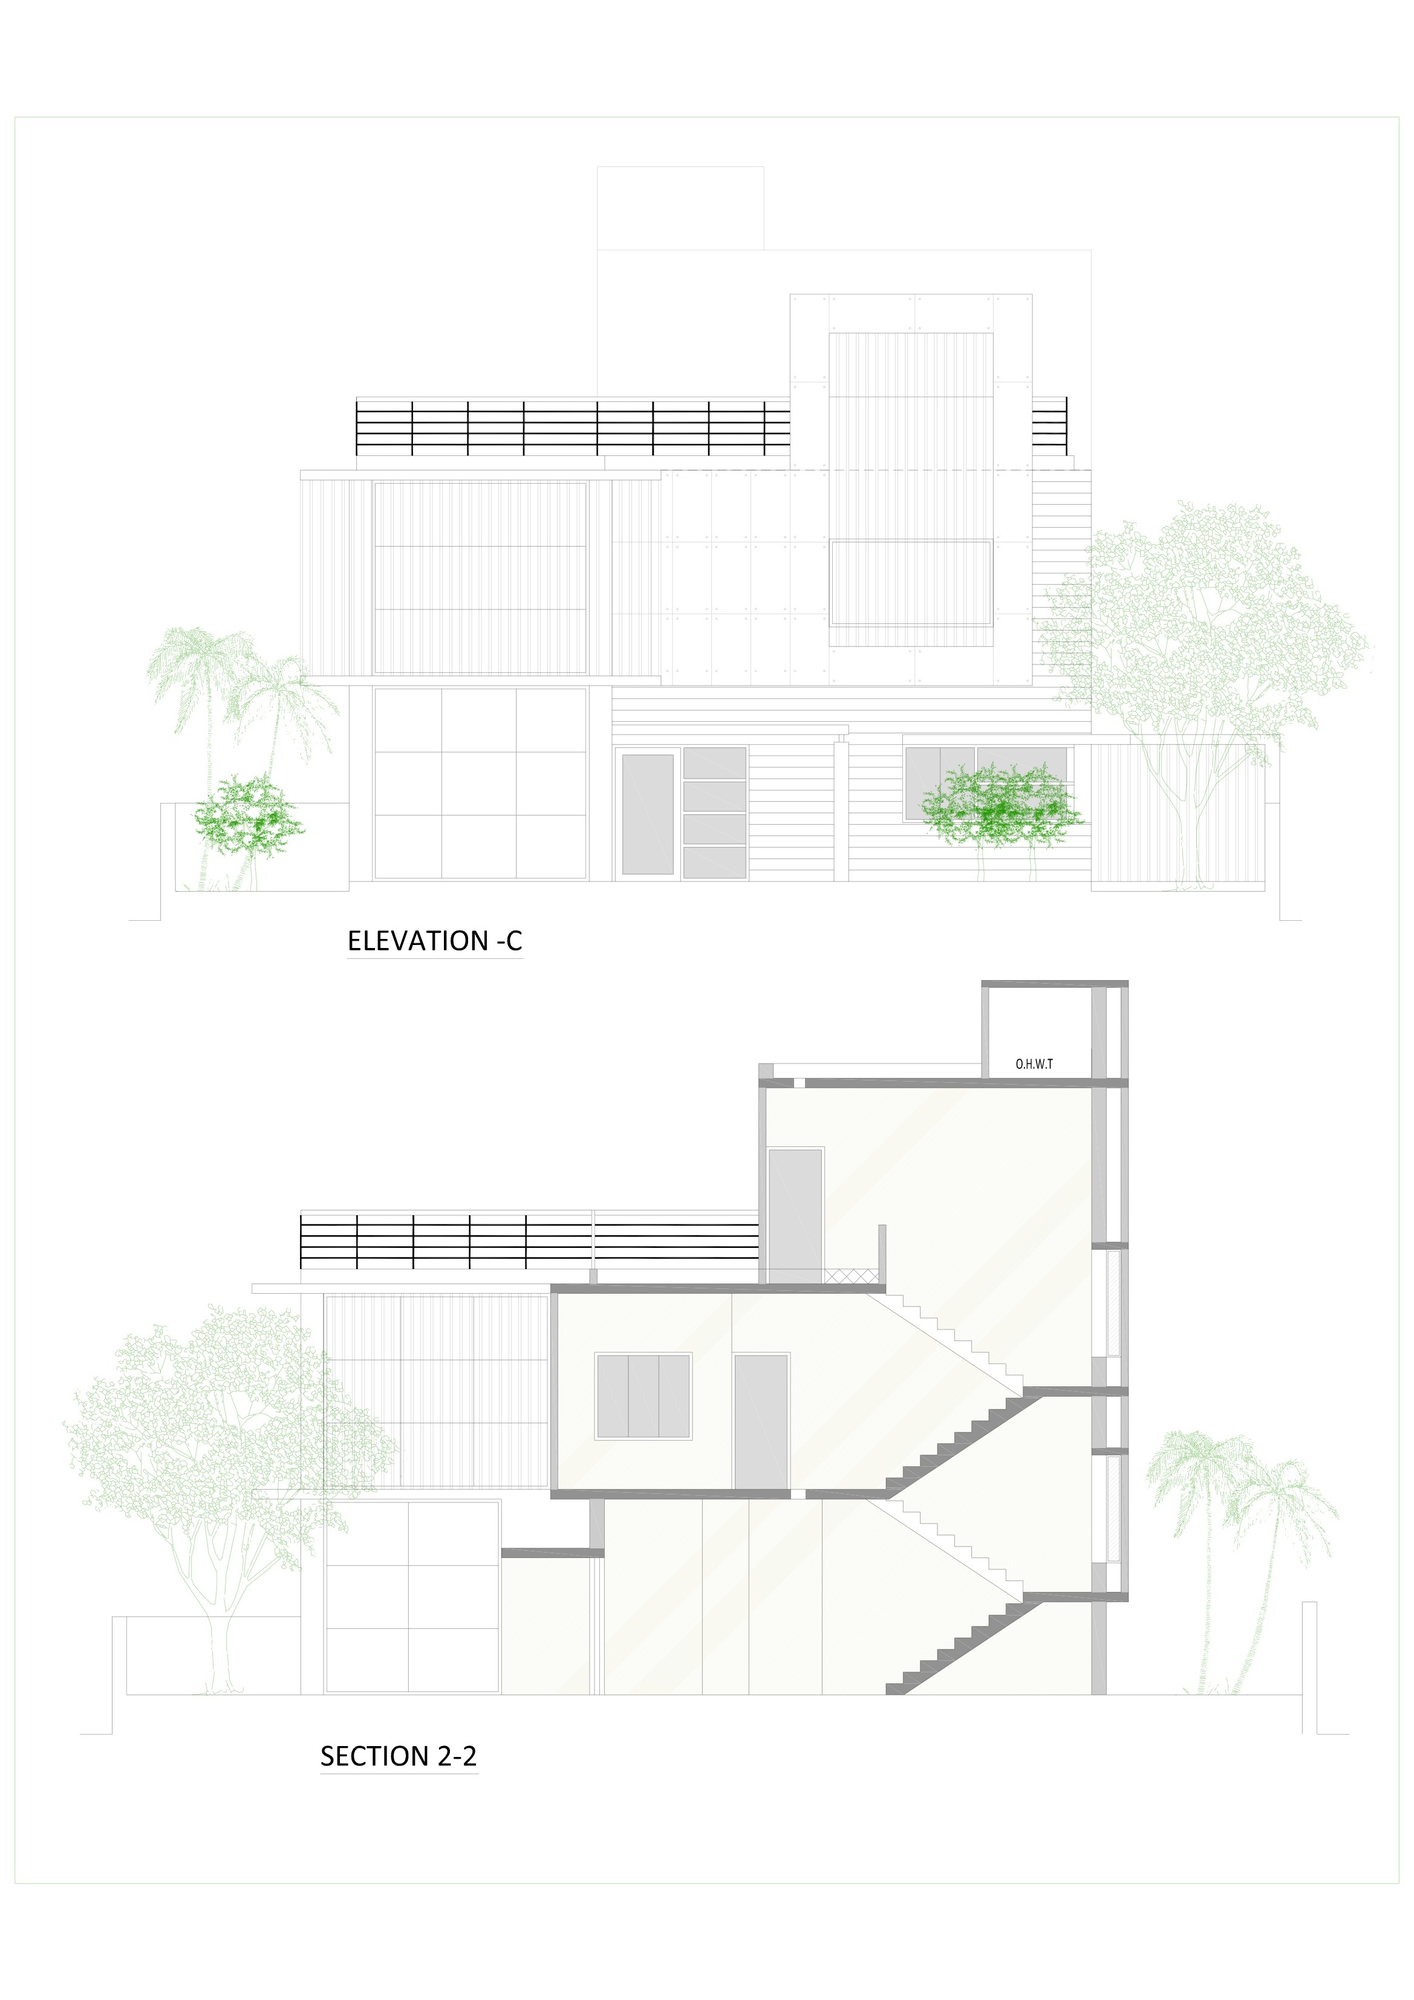 509d3dbeb3fc4b56c10000d6_the-green-house-hiren-patel-architects_the_green_house_section___elevation